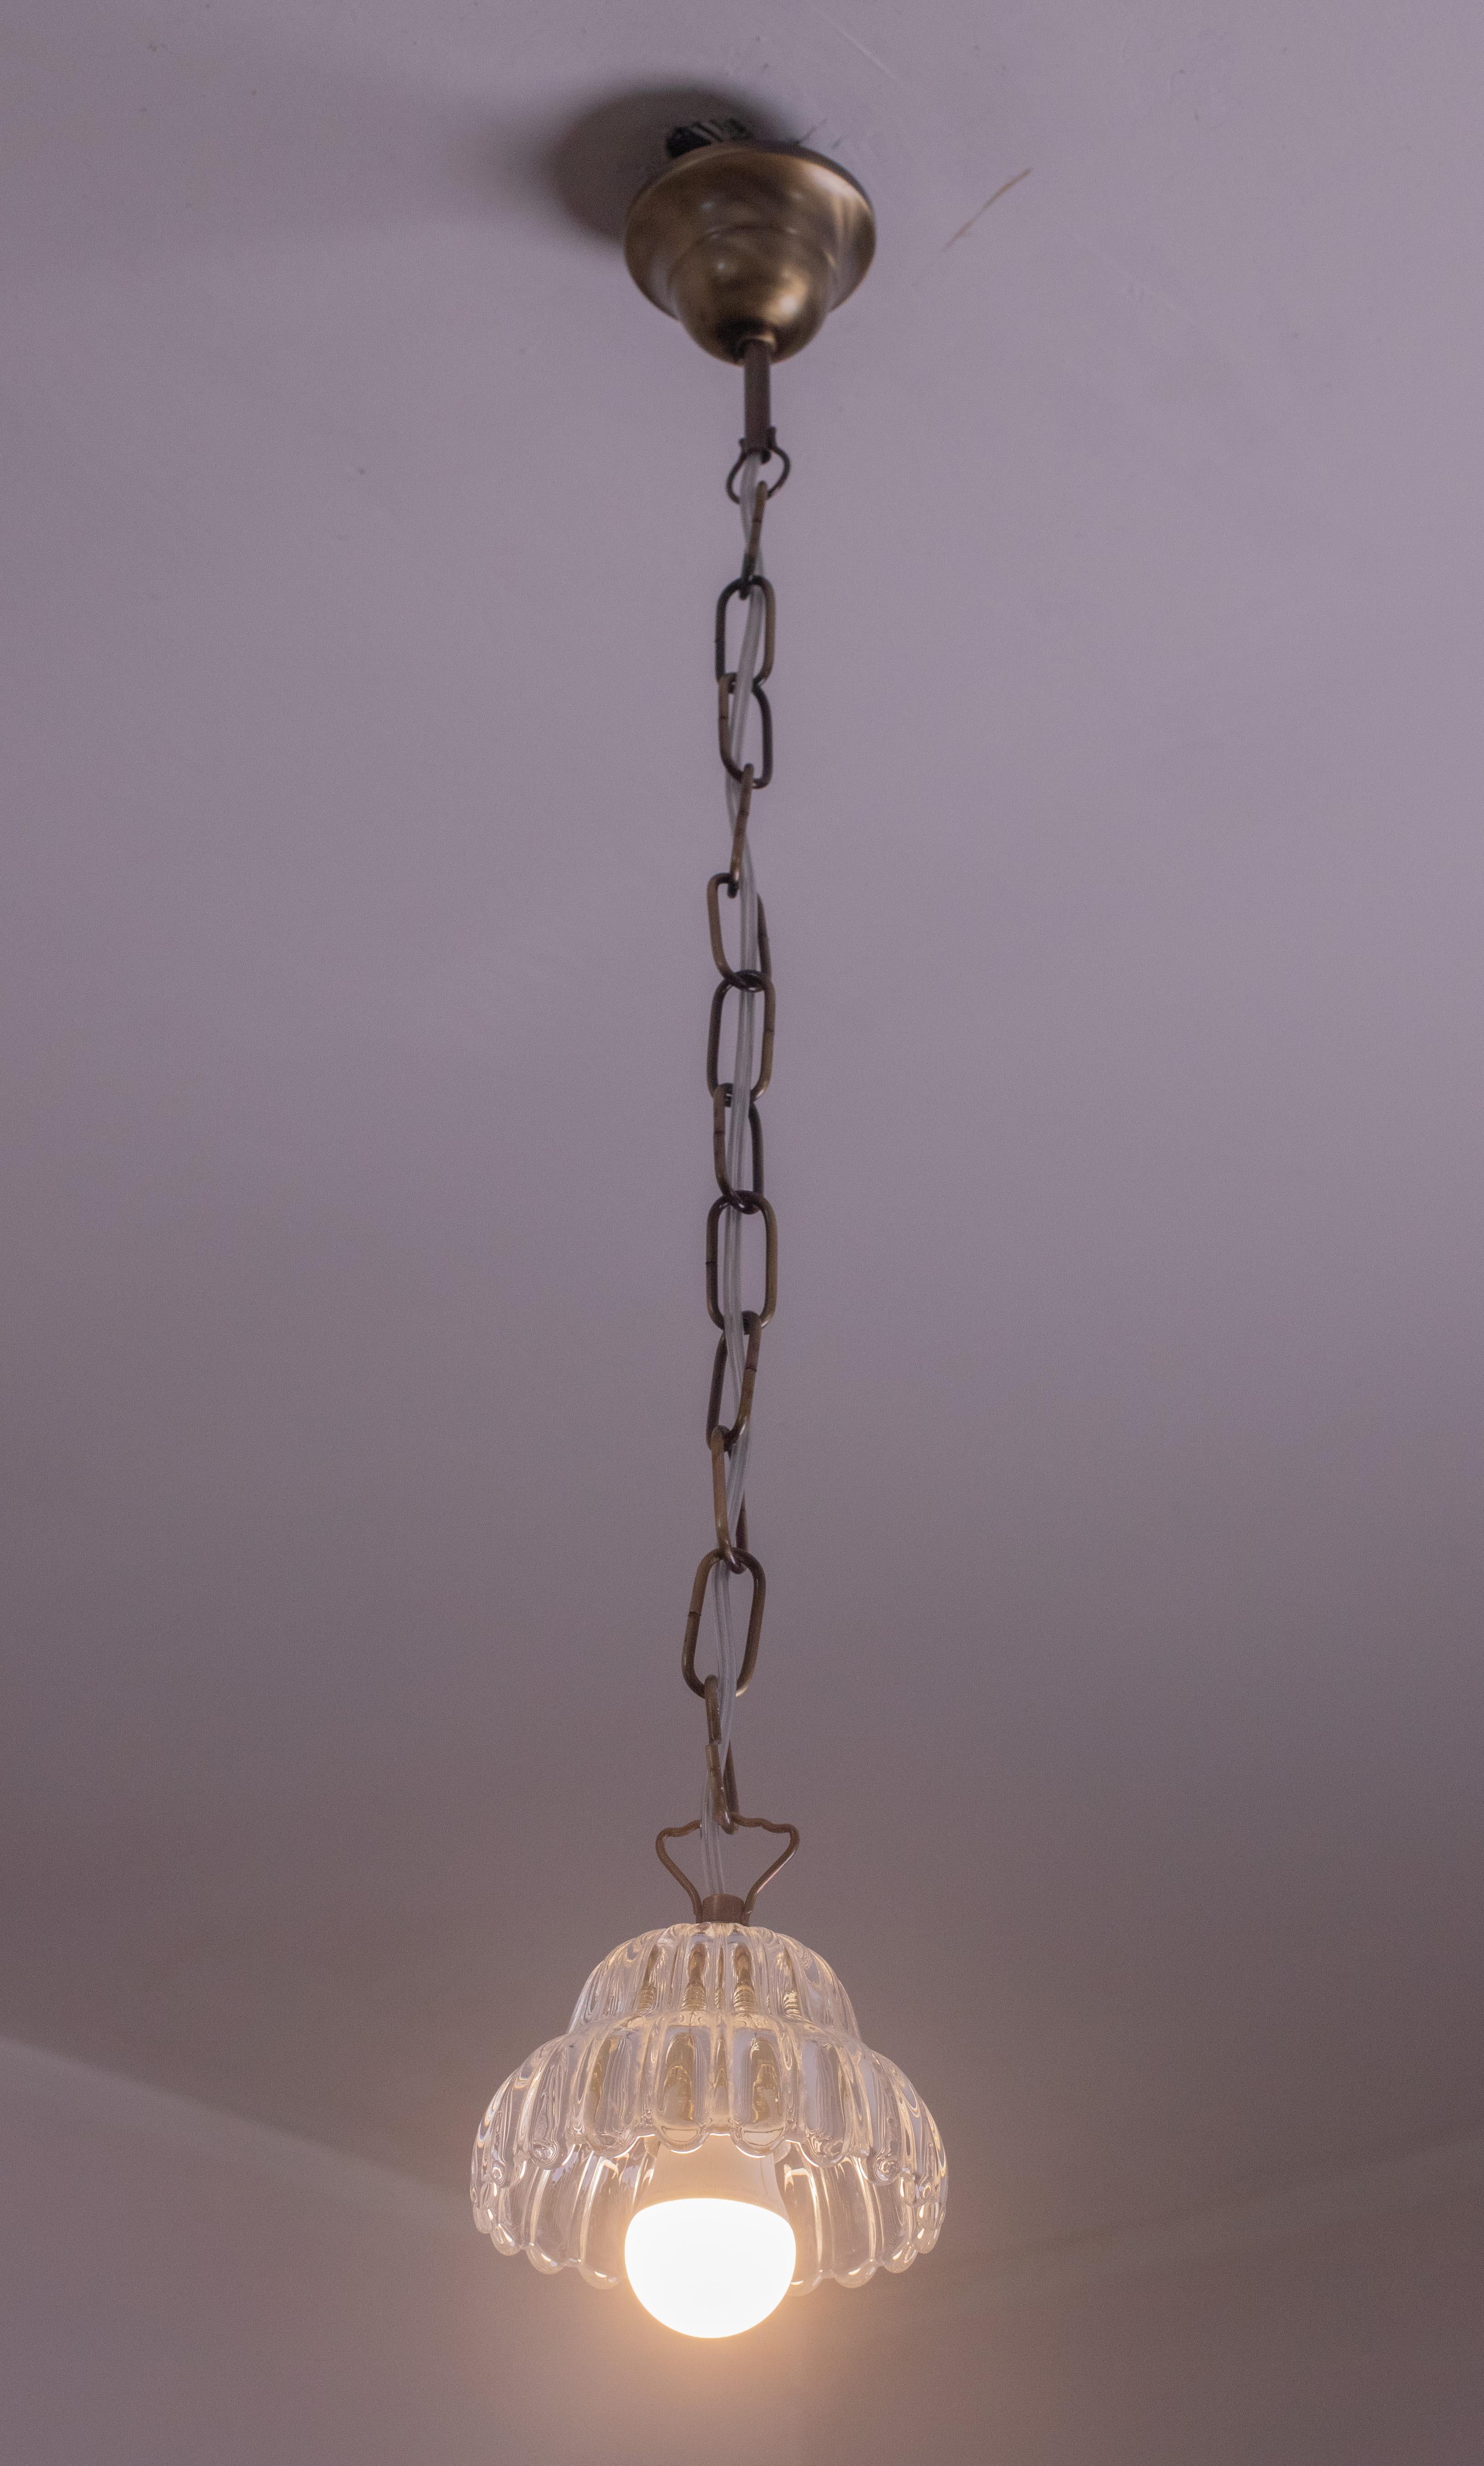 Pretty Murano pendant attributed to the Barovier and Toso glassworks, suitable for decorating a small space.

Period: circa 1950.

One light e27 European standard.

Height 80 centimeters.

Cup diameter 12 centimeters.

Perfect